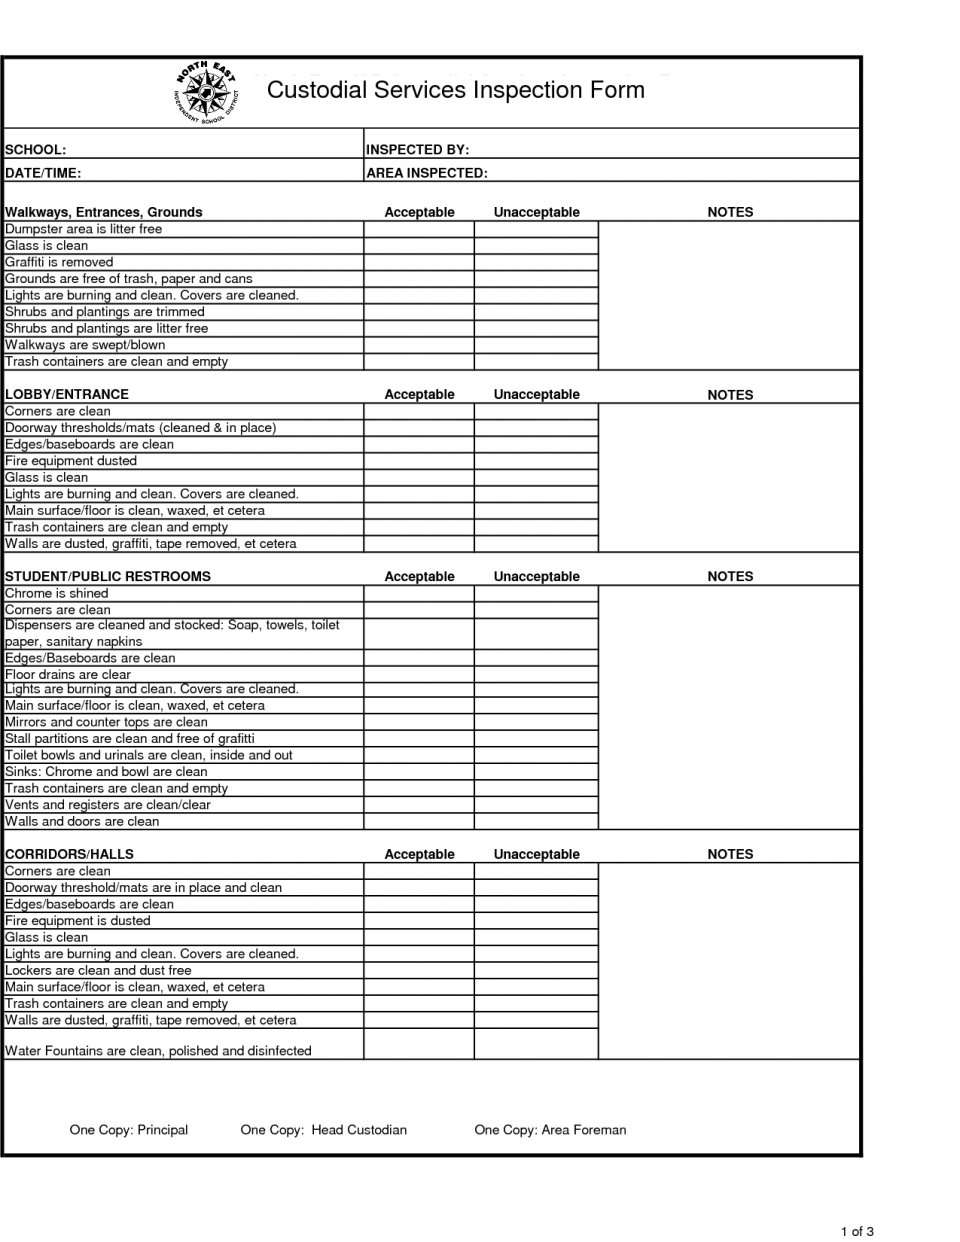 Inspection Spreadsheet Template Best Photos Of Free Intended For Blank Checklist Template Pdf